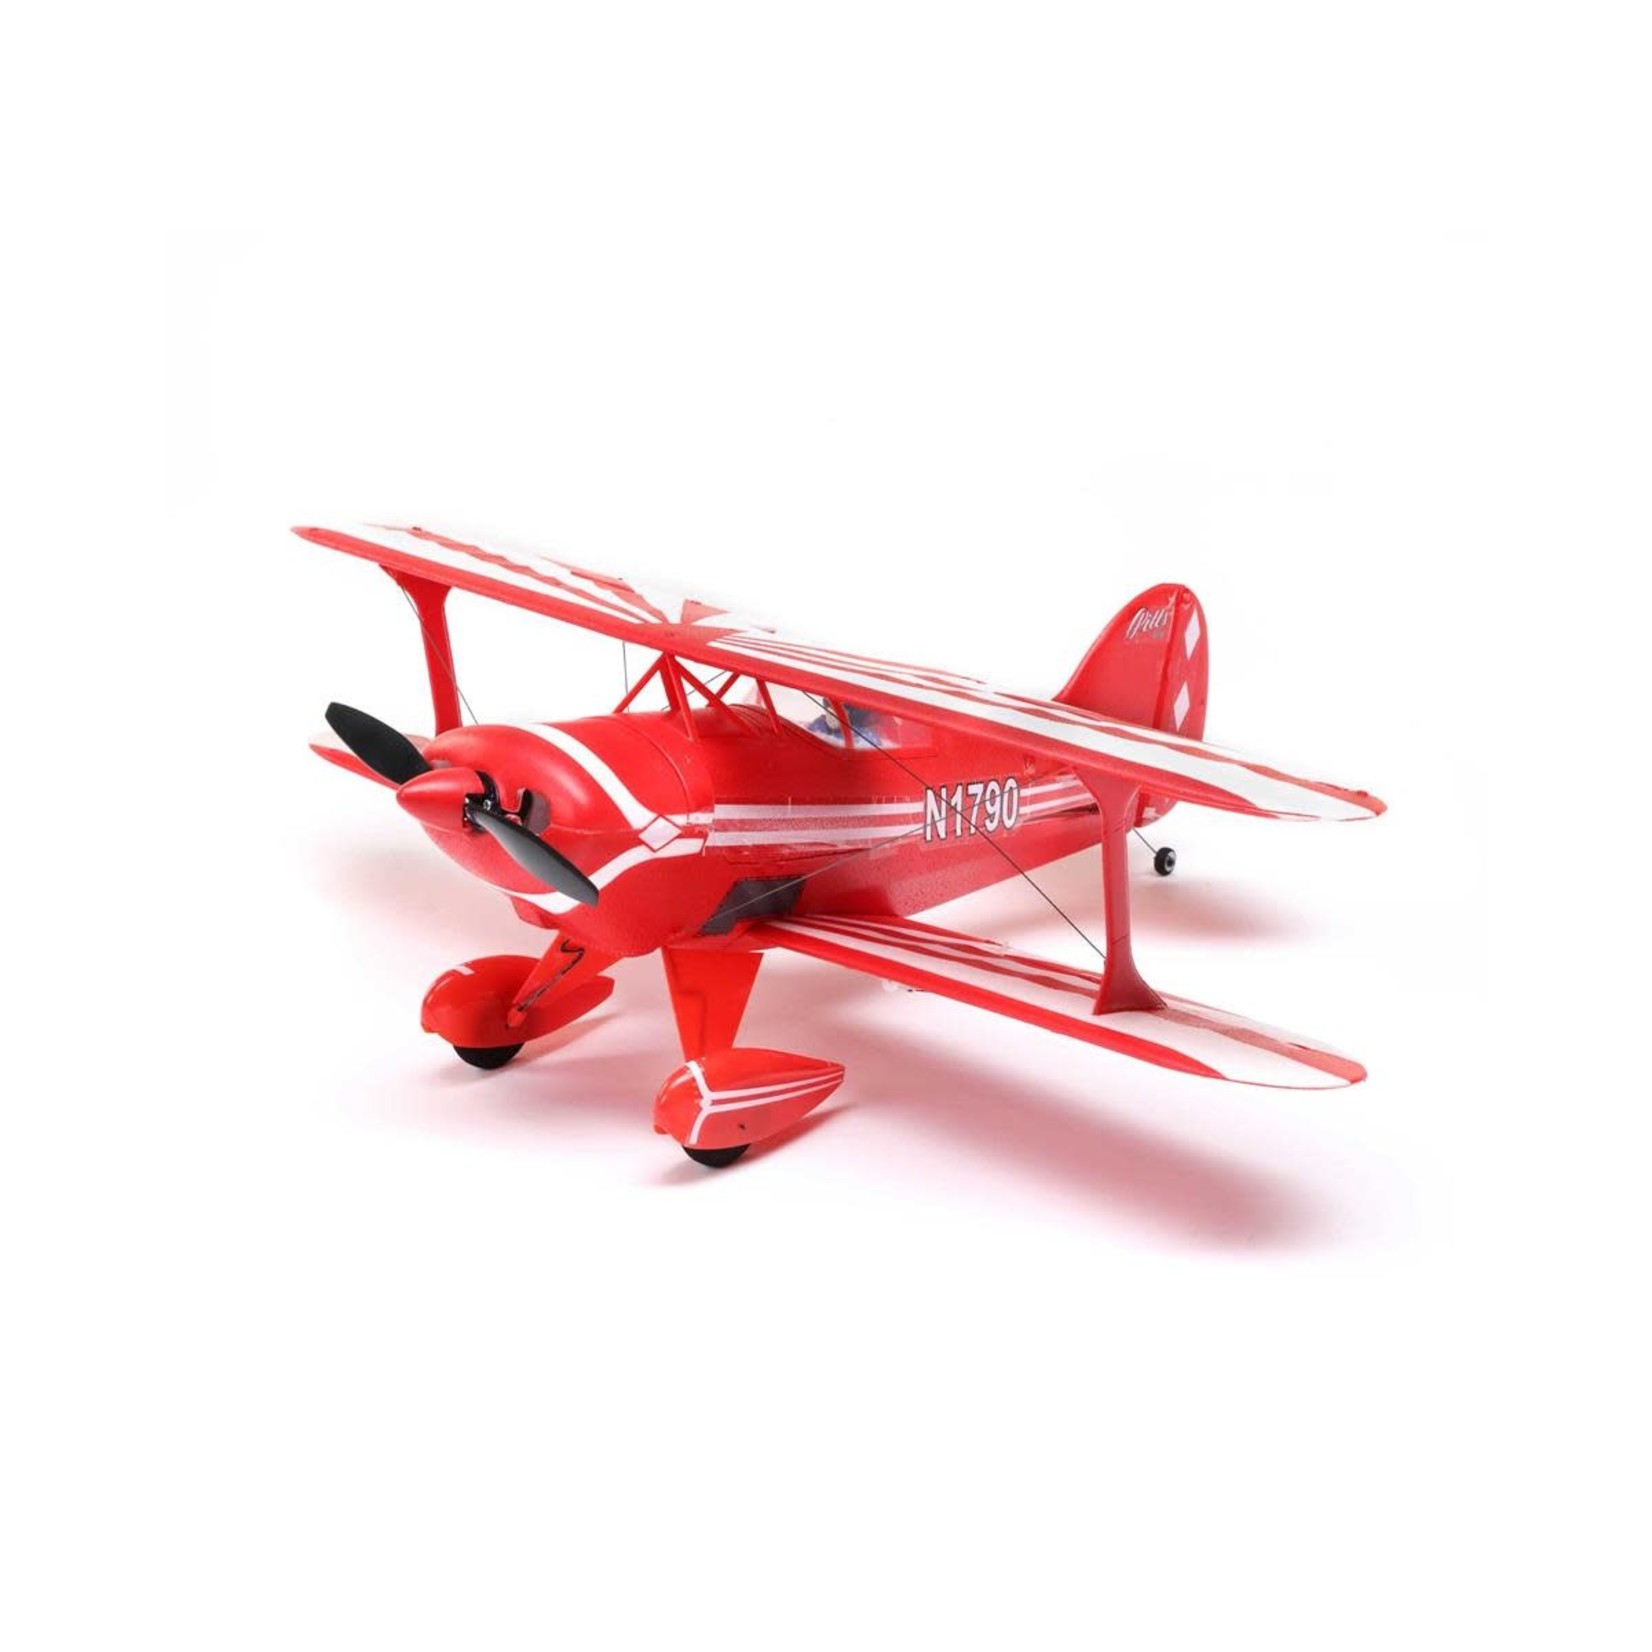 E-flite UMX Night Vapor BNF Basic with AS3X and SAFE Select, 376mm